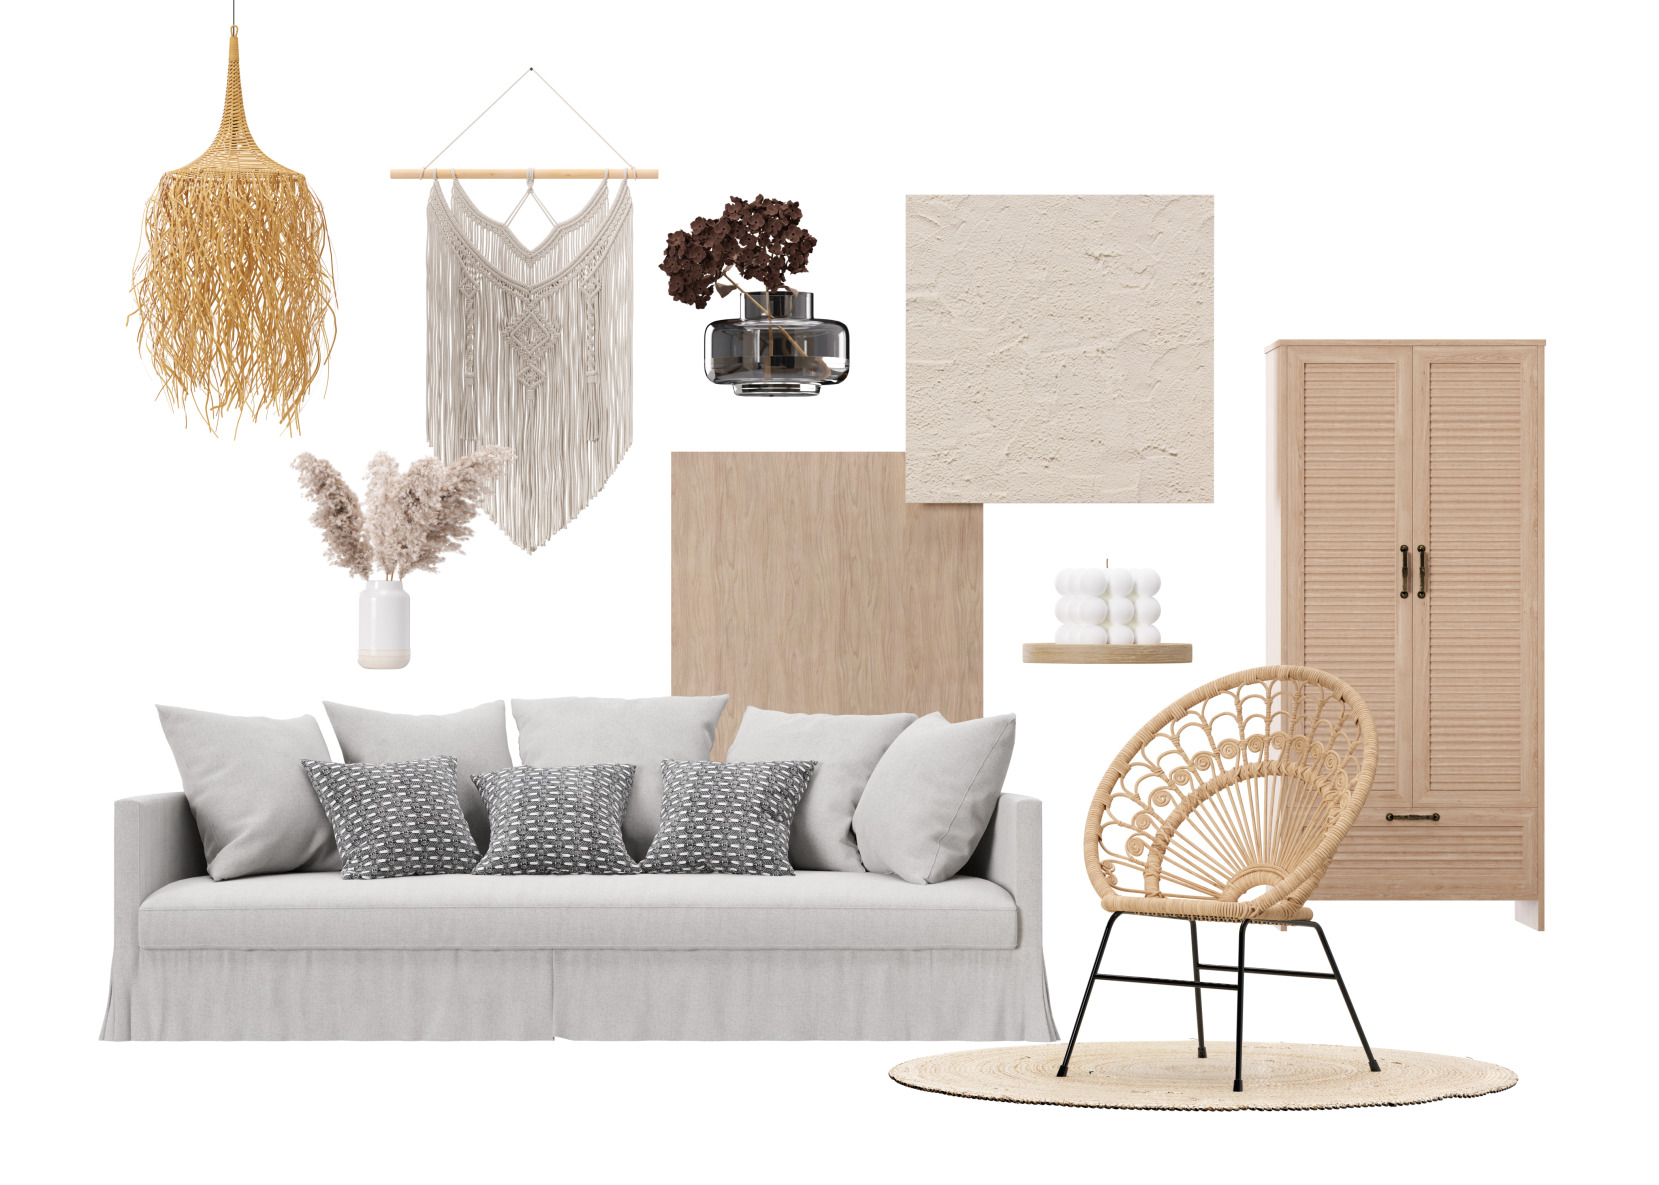 A modern organic moodboard featuring cool neutrals and warm wood tones